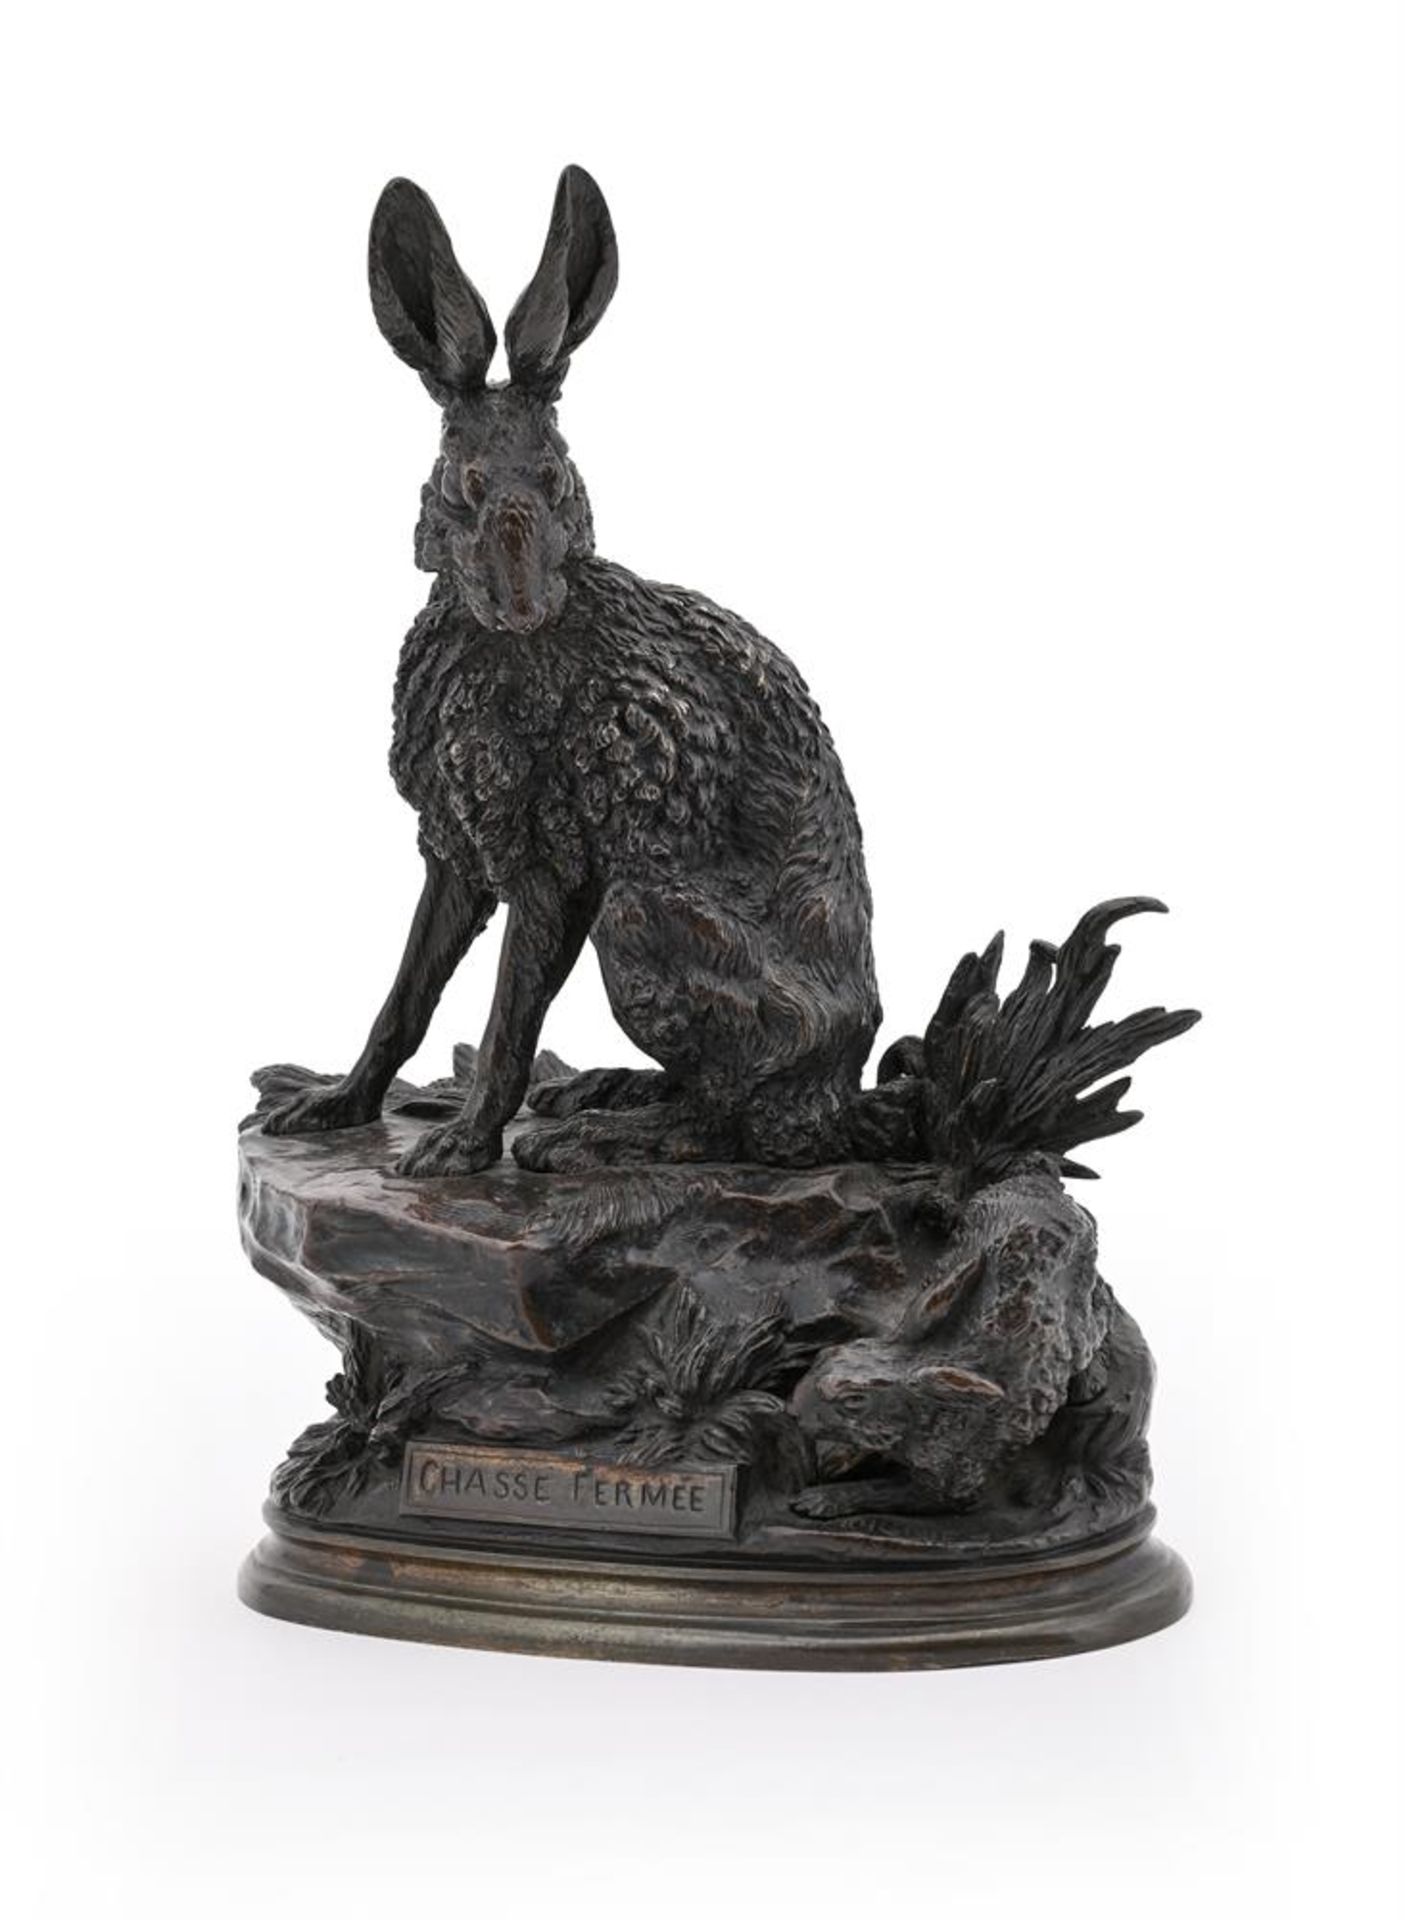 JULES MOIGNIEZ (FRENCH, 1835-1894), A RARE PAIR OF BRONZE MODELS OF HARES - Image 2 of 9